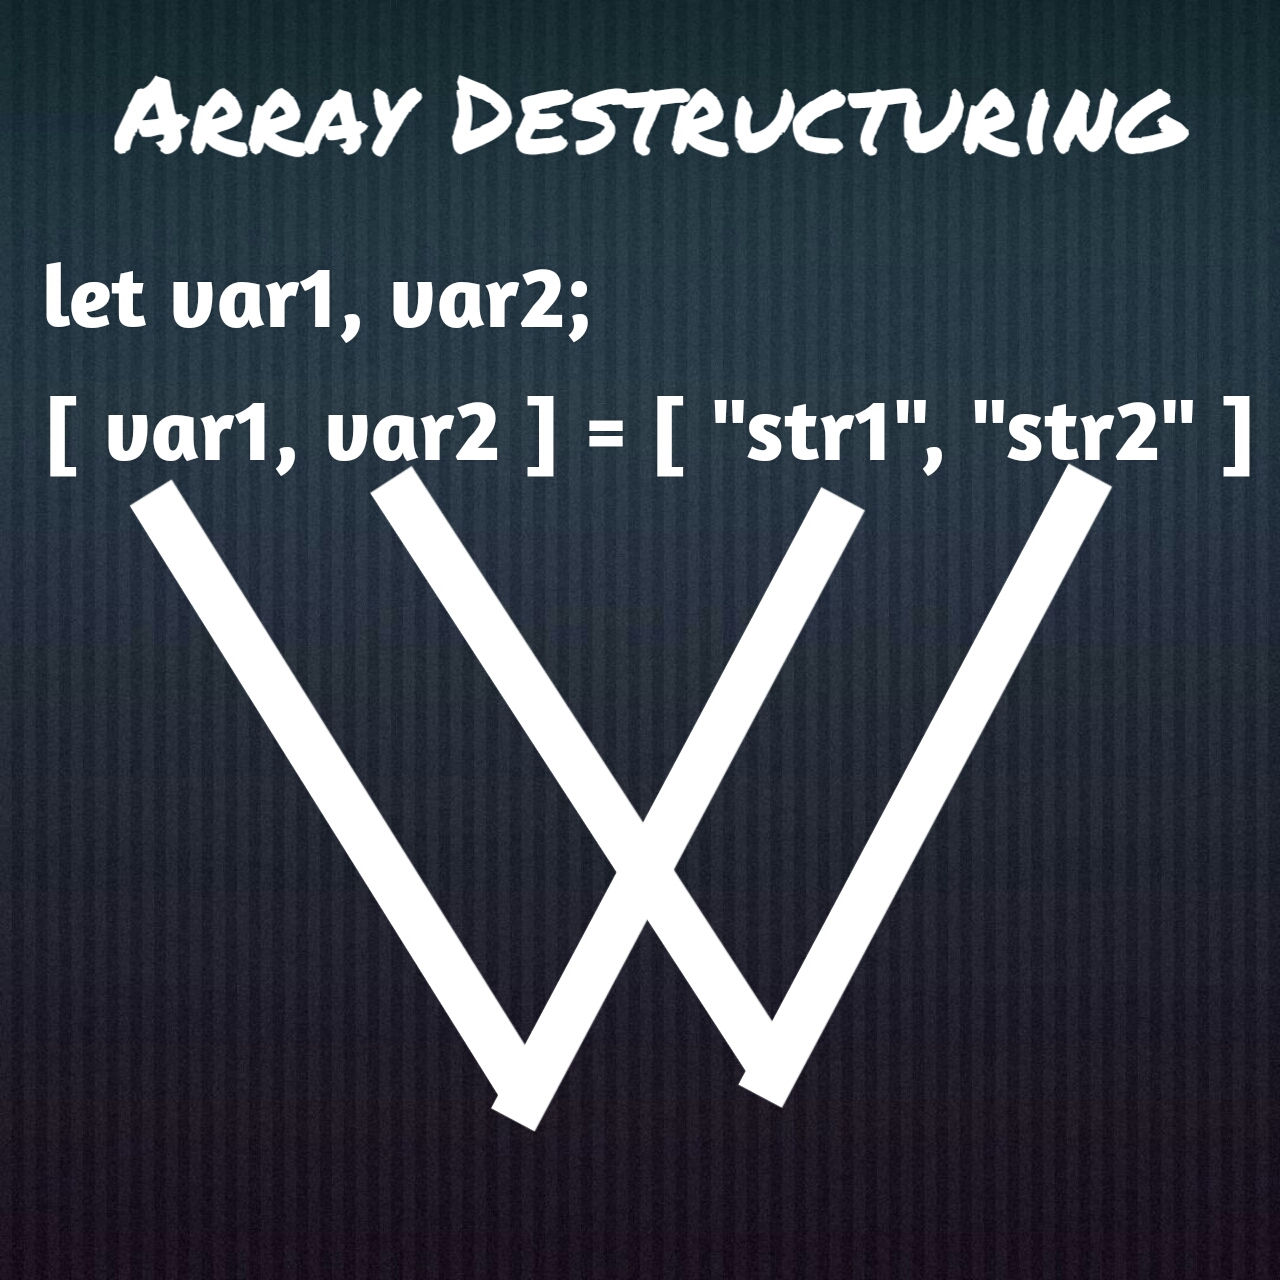 Image illustrating the process of array destructuring